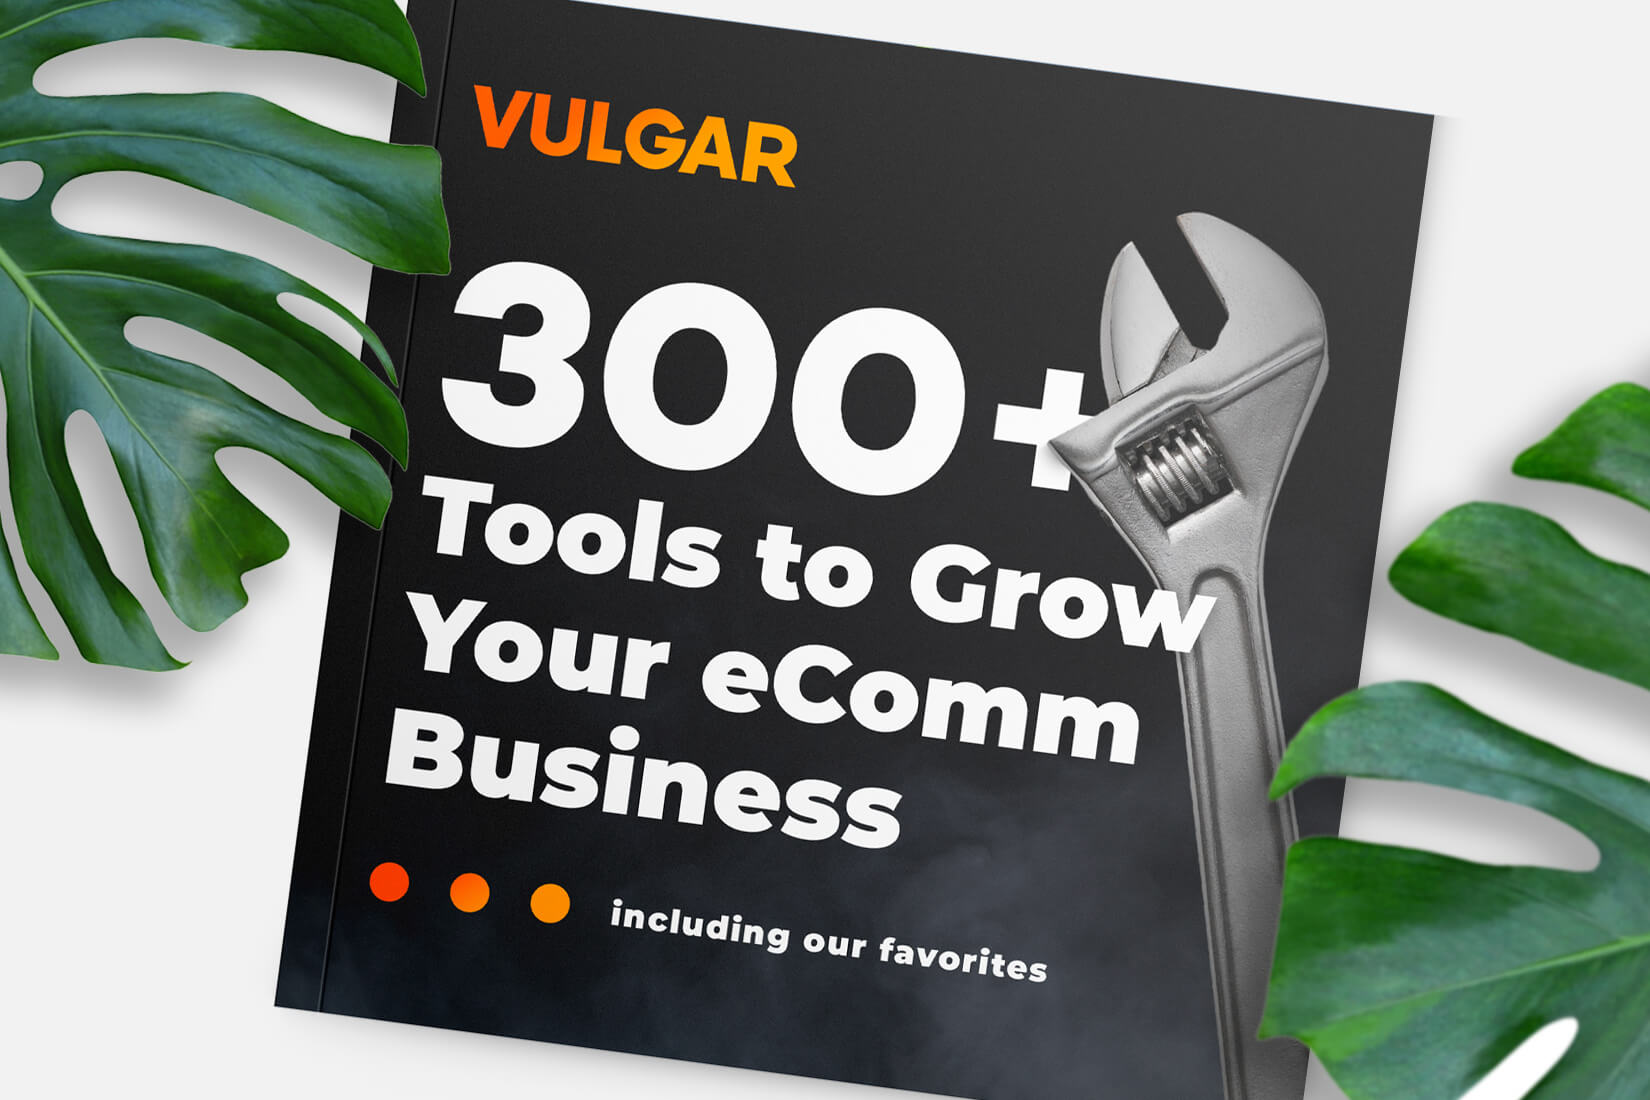 Free eBook: 300+ Tools to Grow Your eCommerce Business